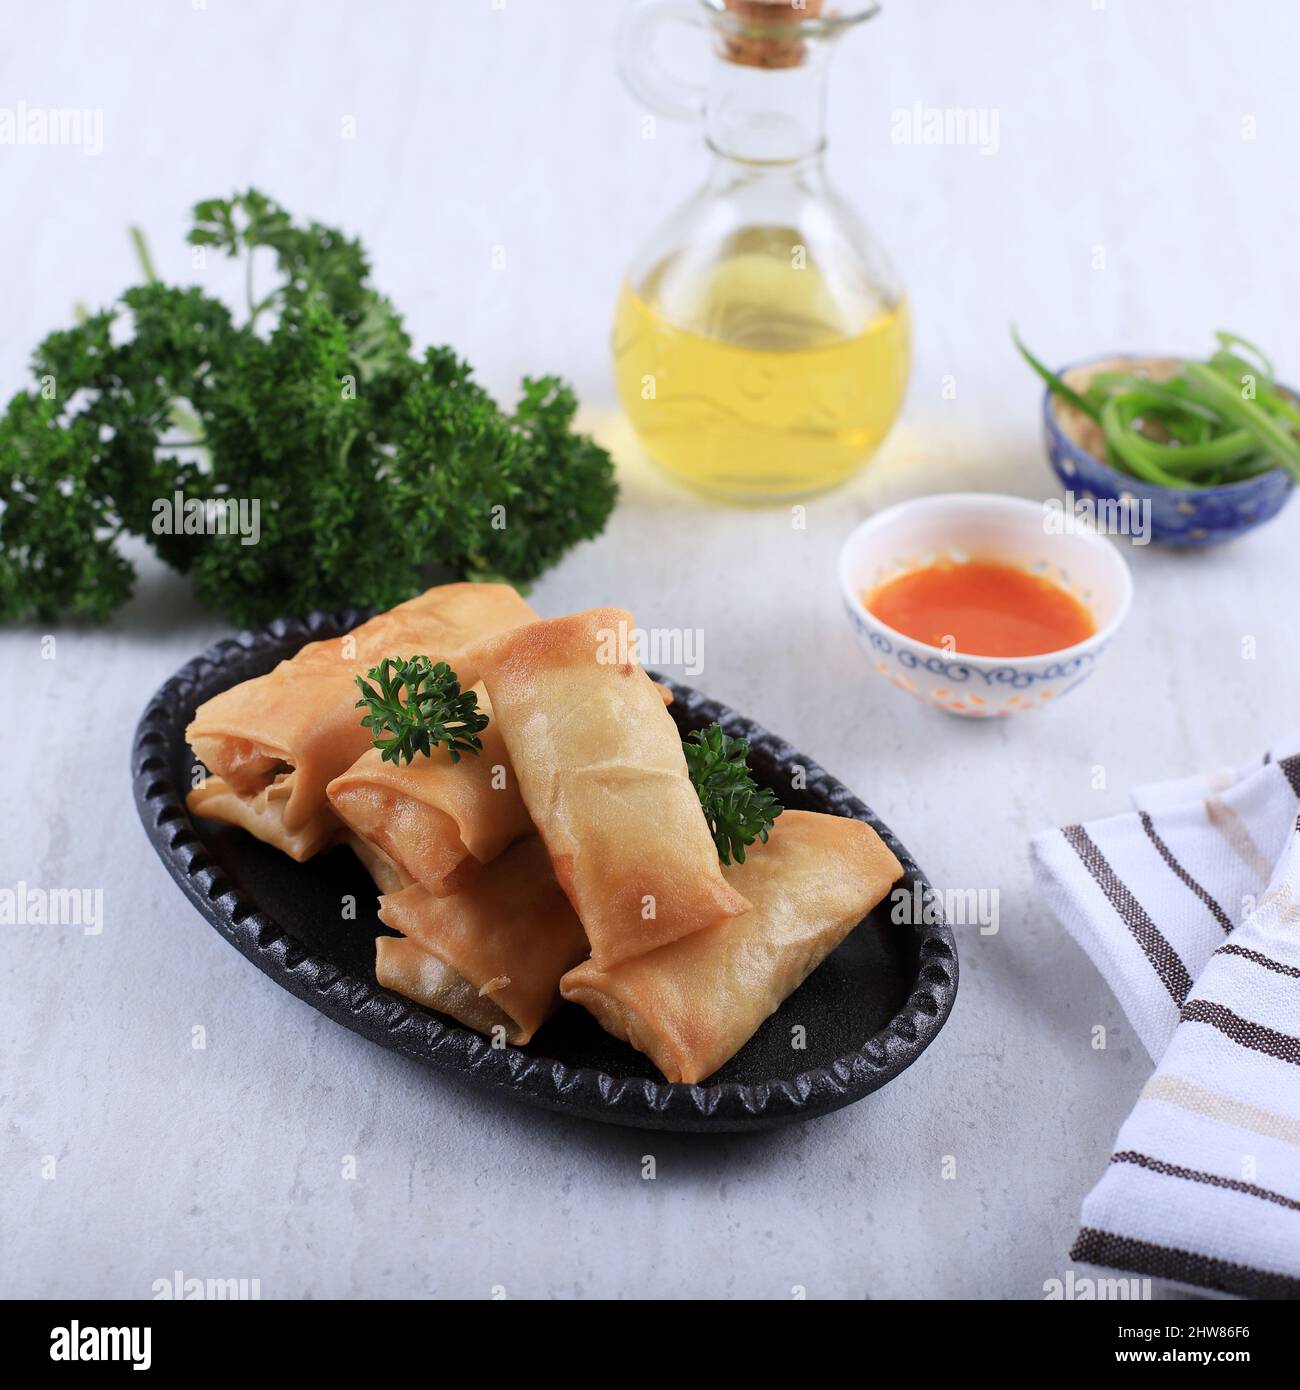 Homemade Spring Roll (Lumpia), Stuffed with Chicken and Shrimp, Served with Sour and Sweet Sauce, on White Table Stock Photo